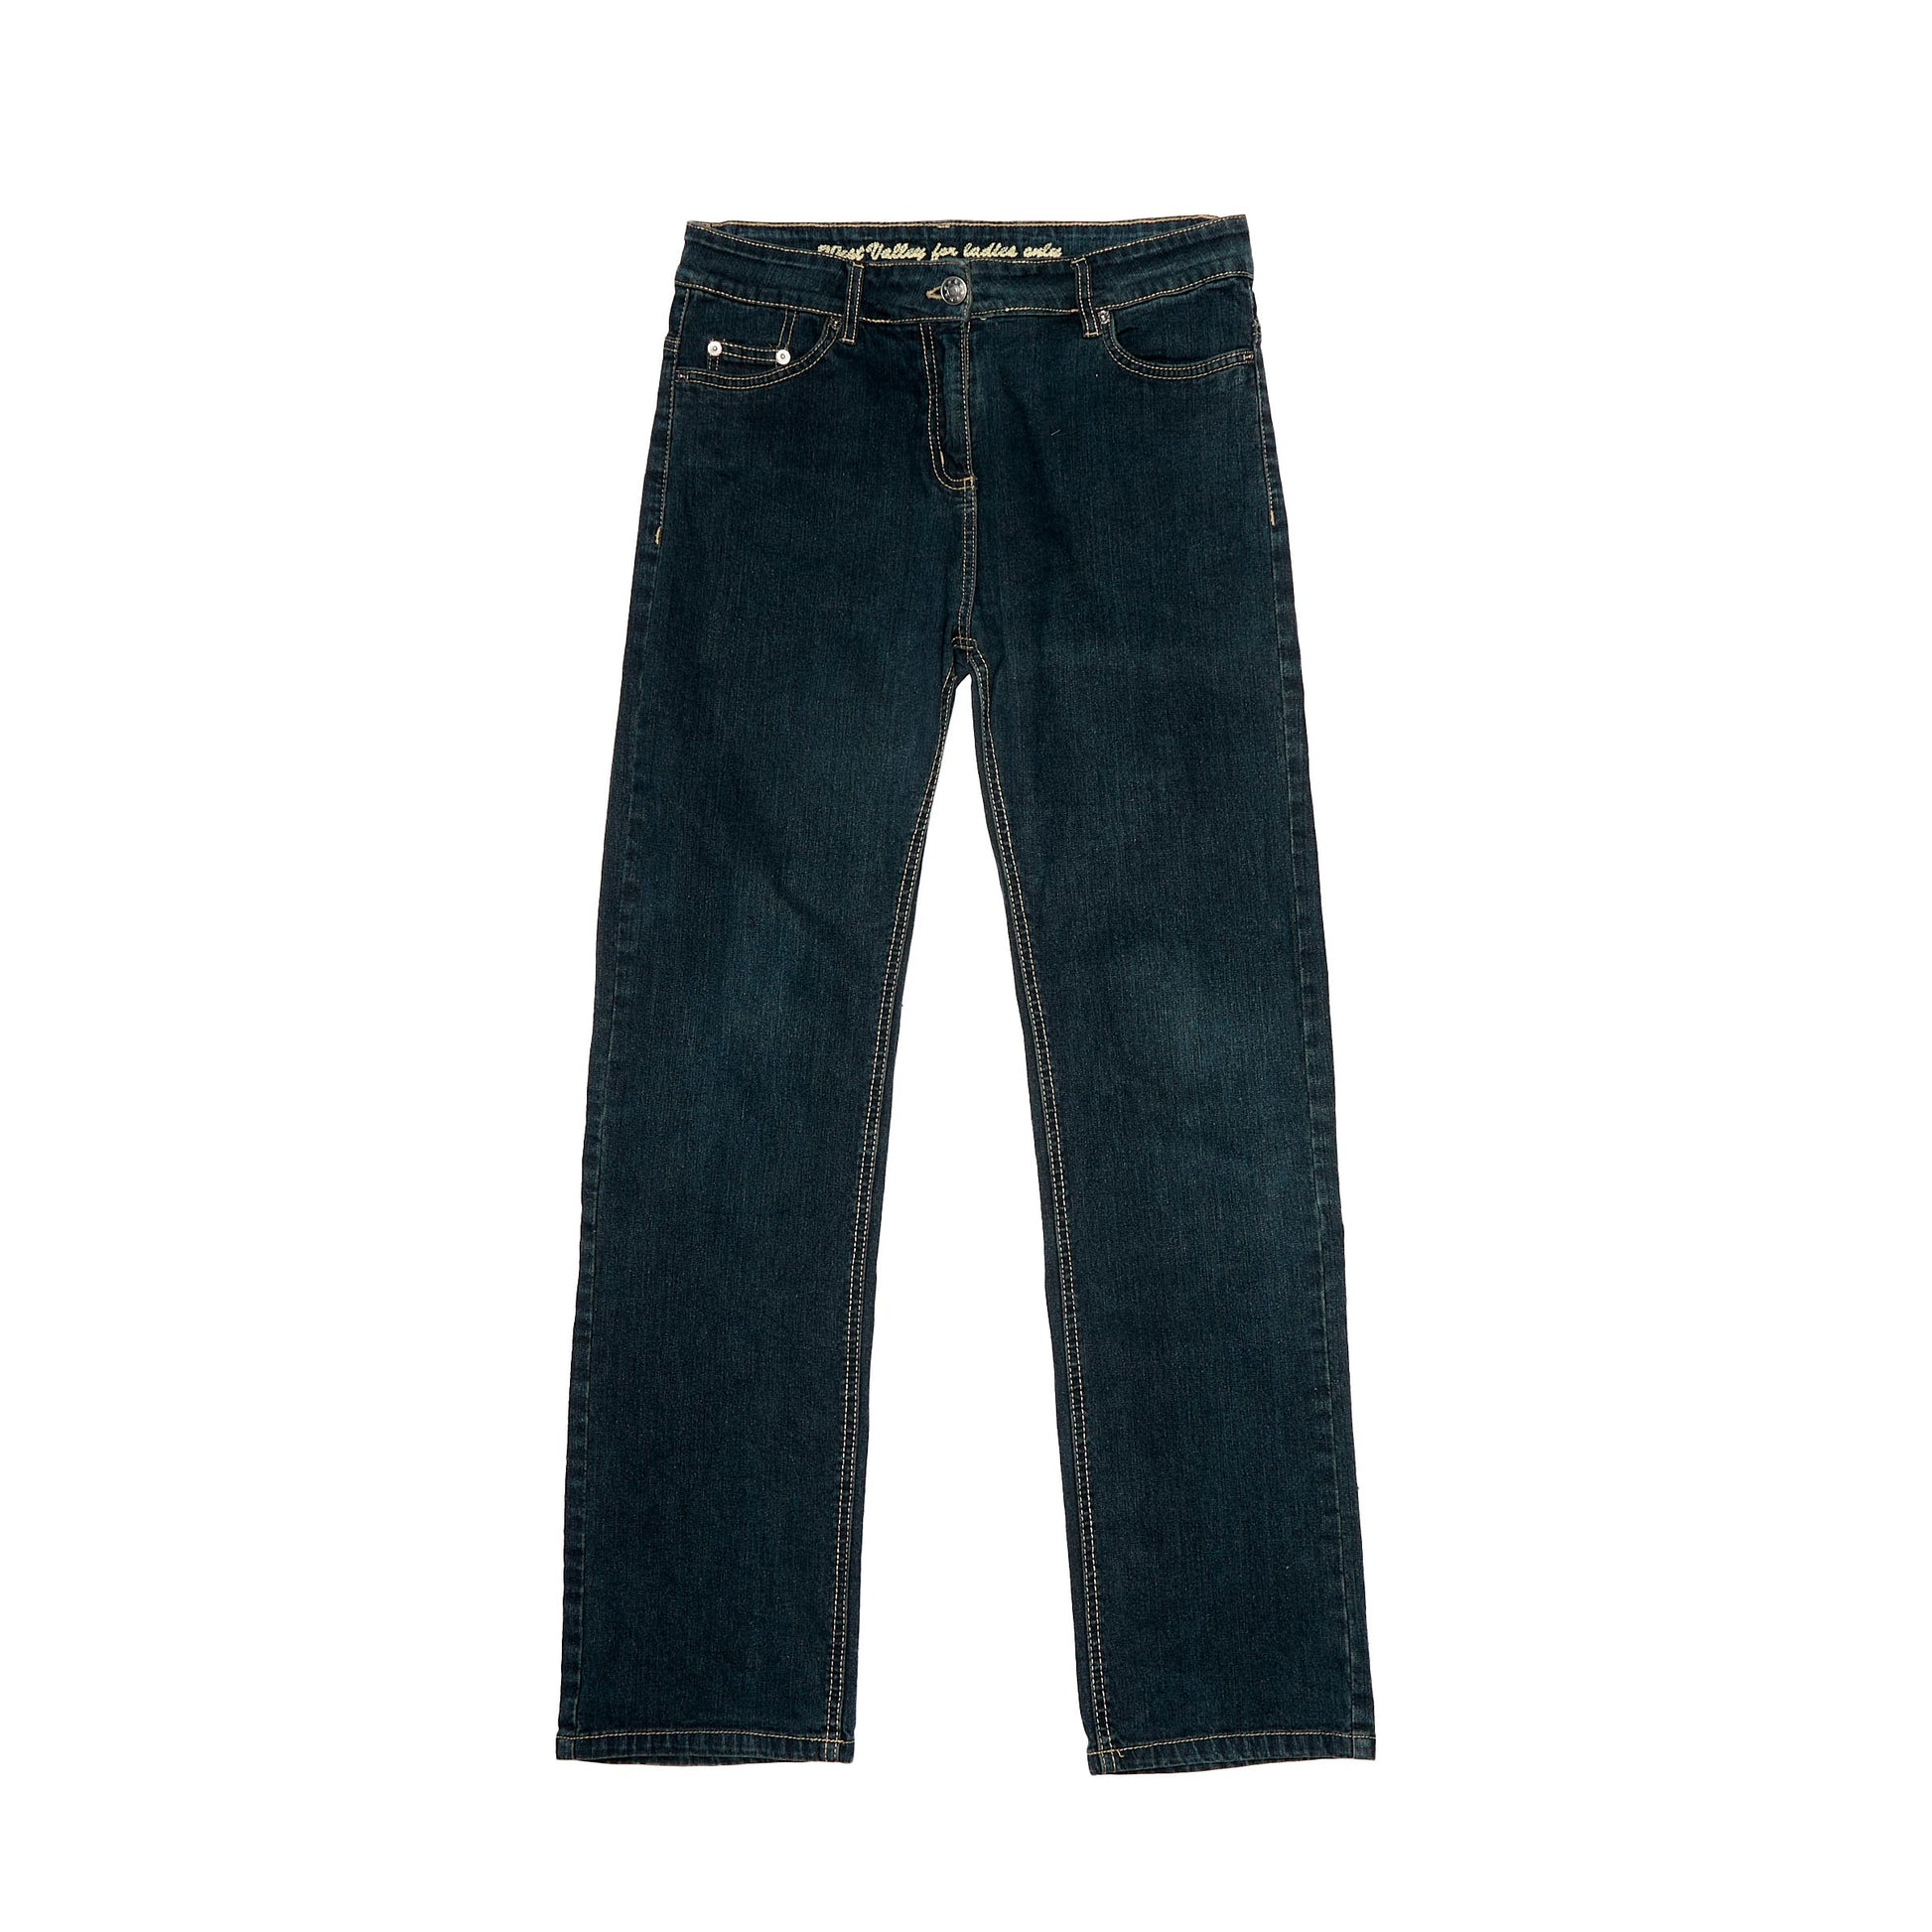 Womens West Valley Straight Leg Jeans - UK 16